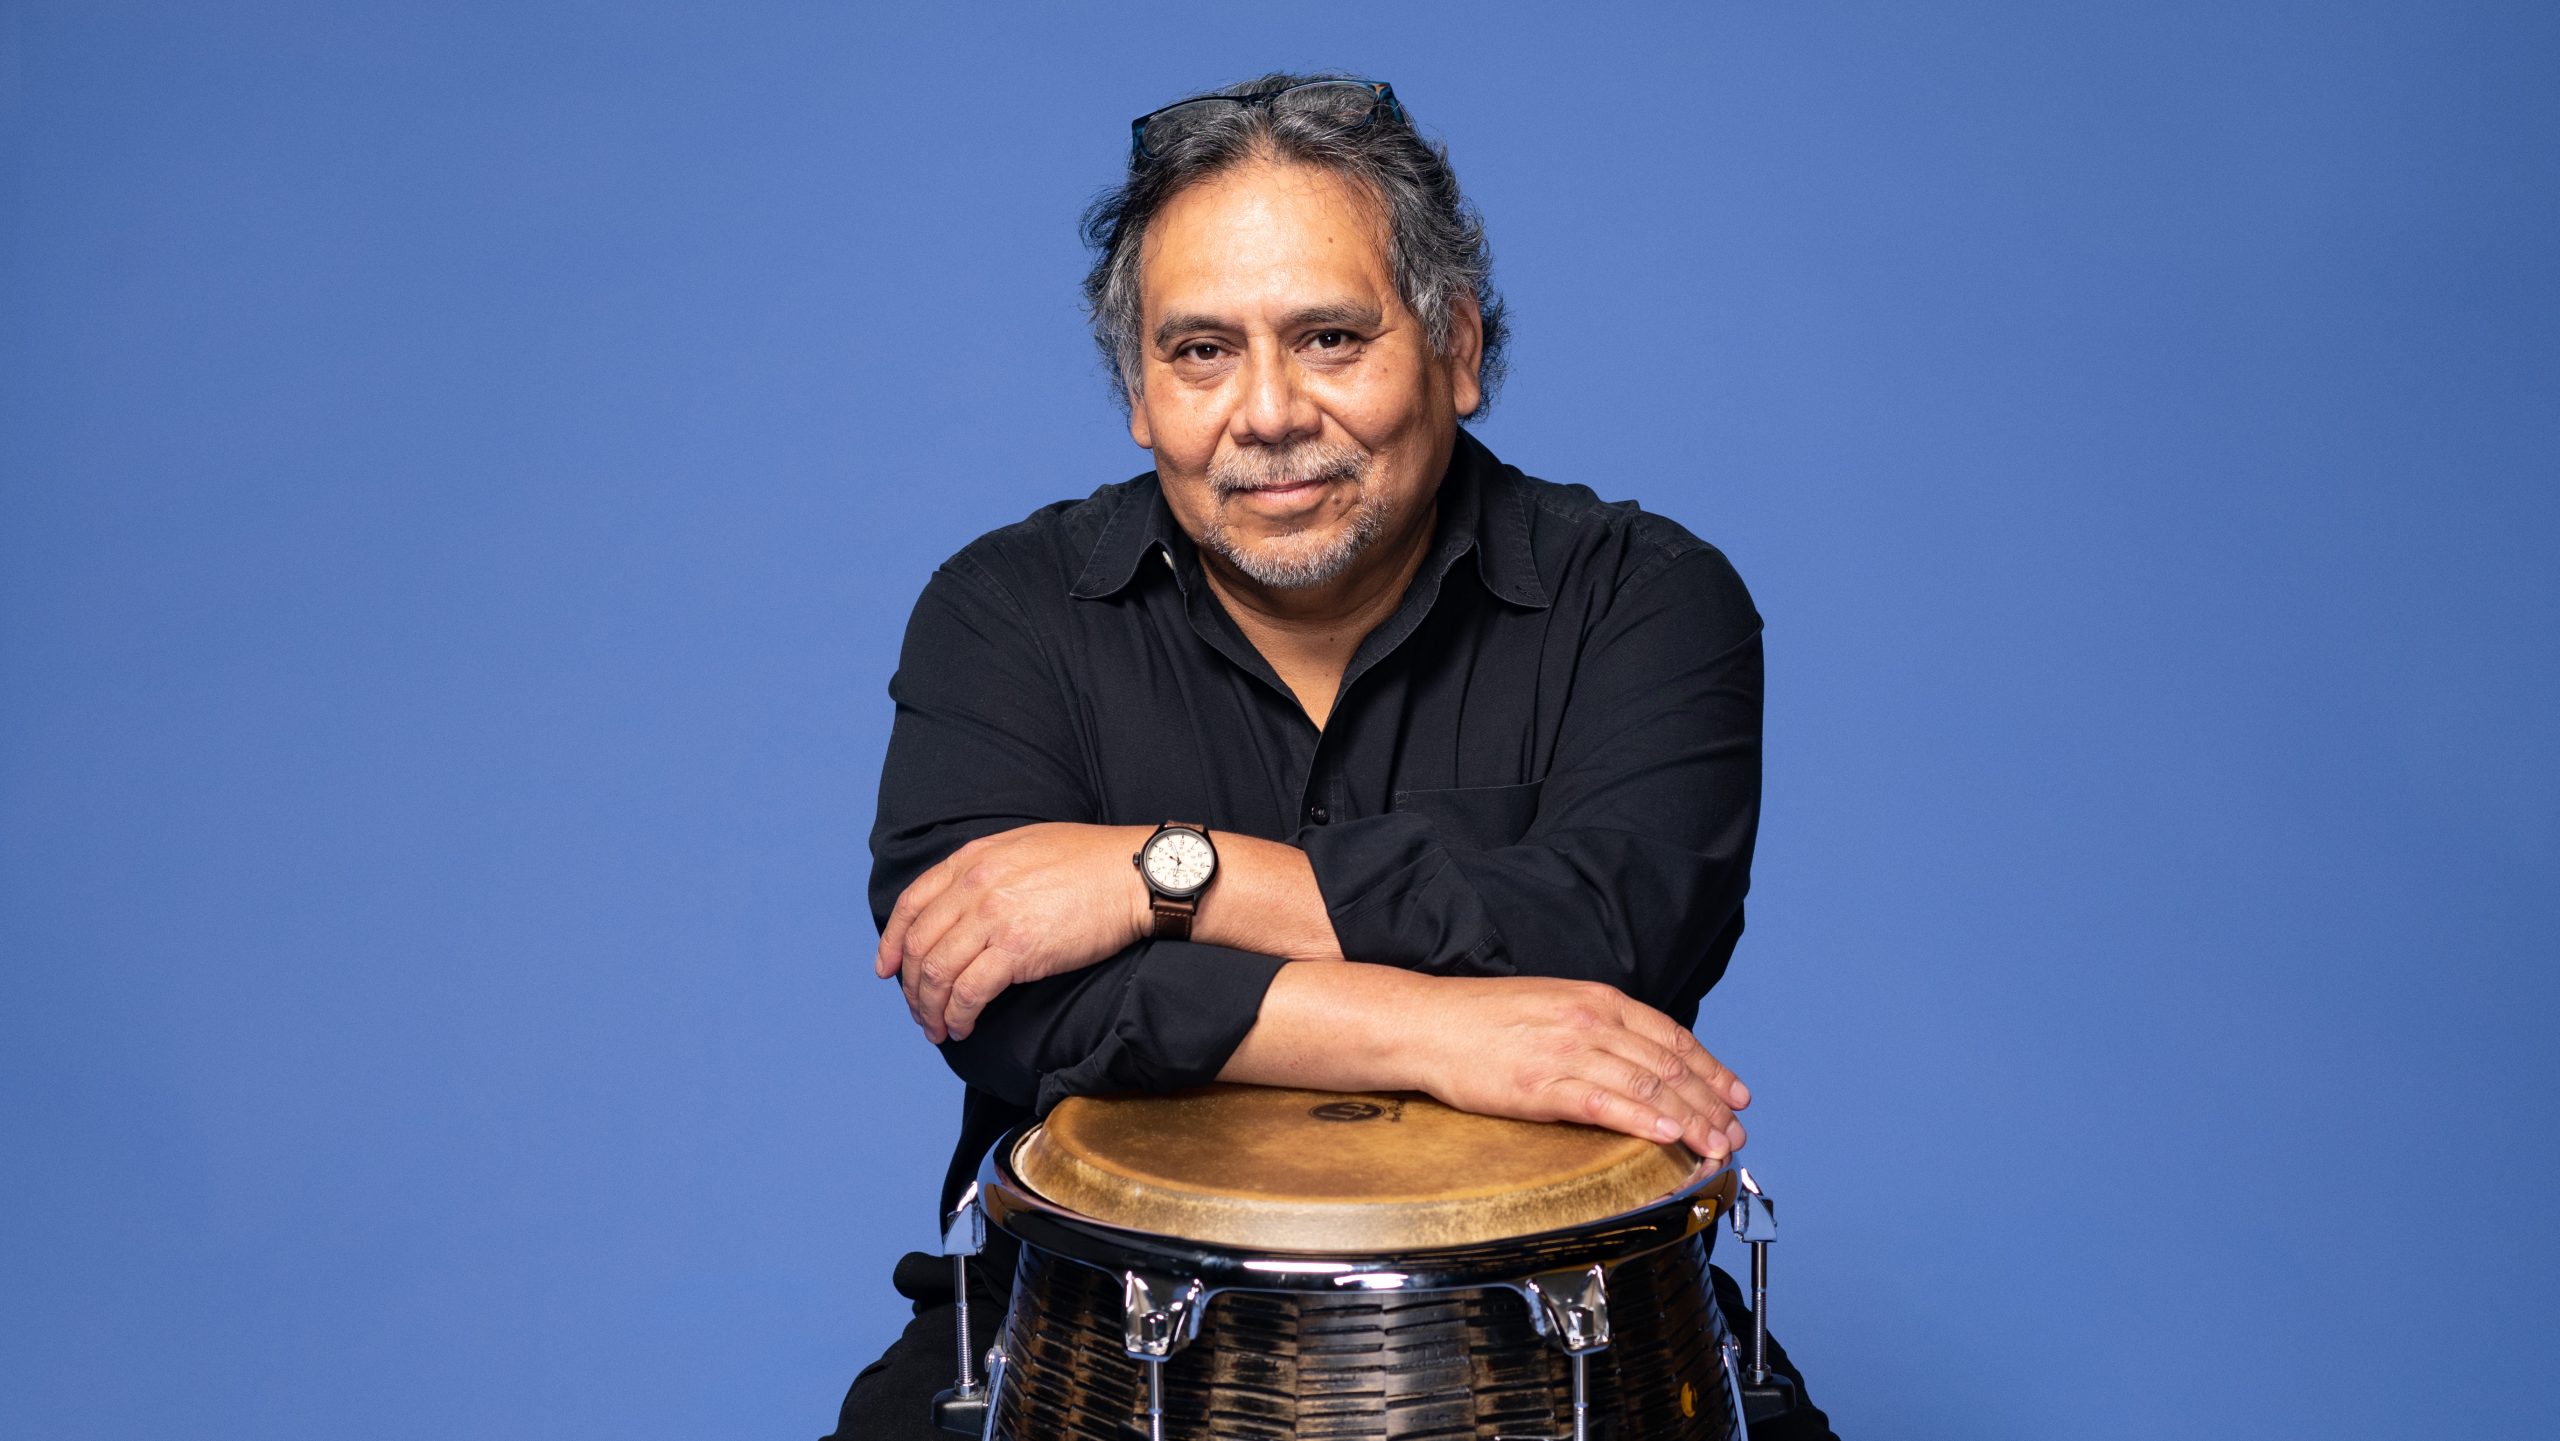 Felix Contreras seated, leaning with his arms resting on a large drum.